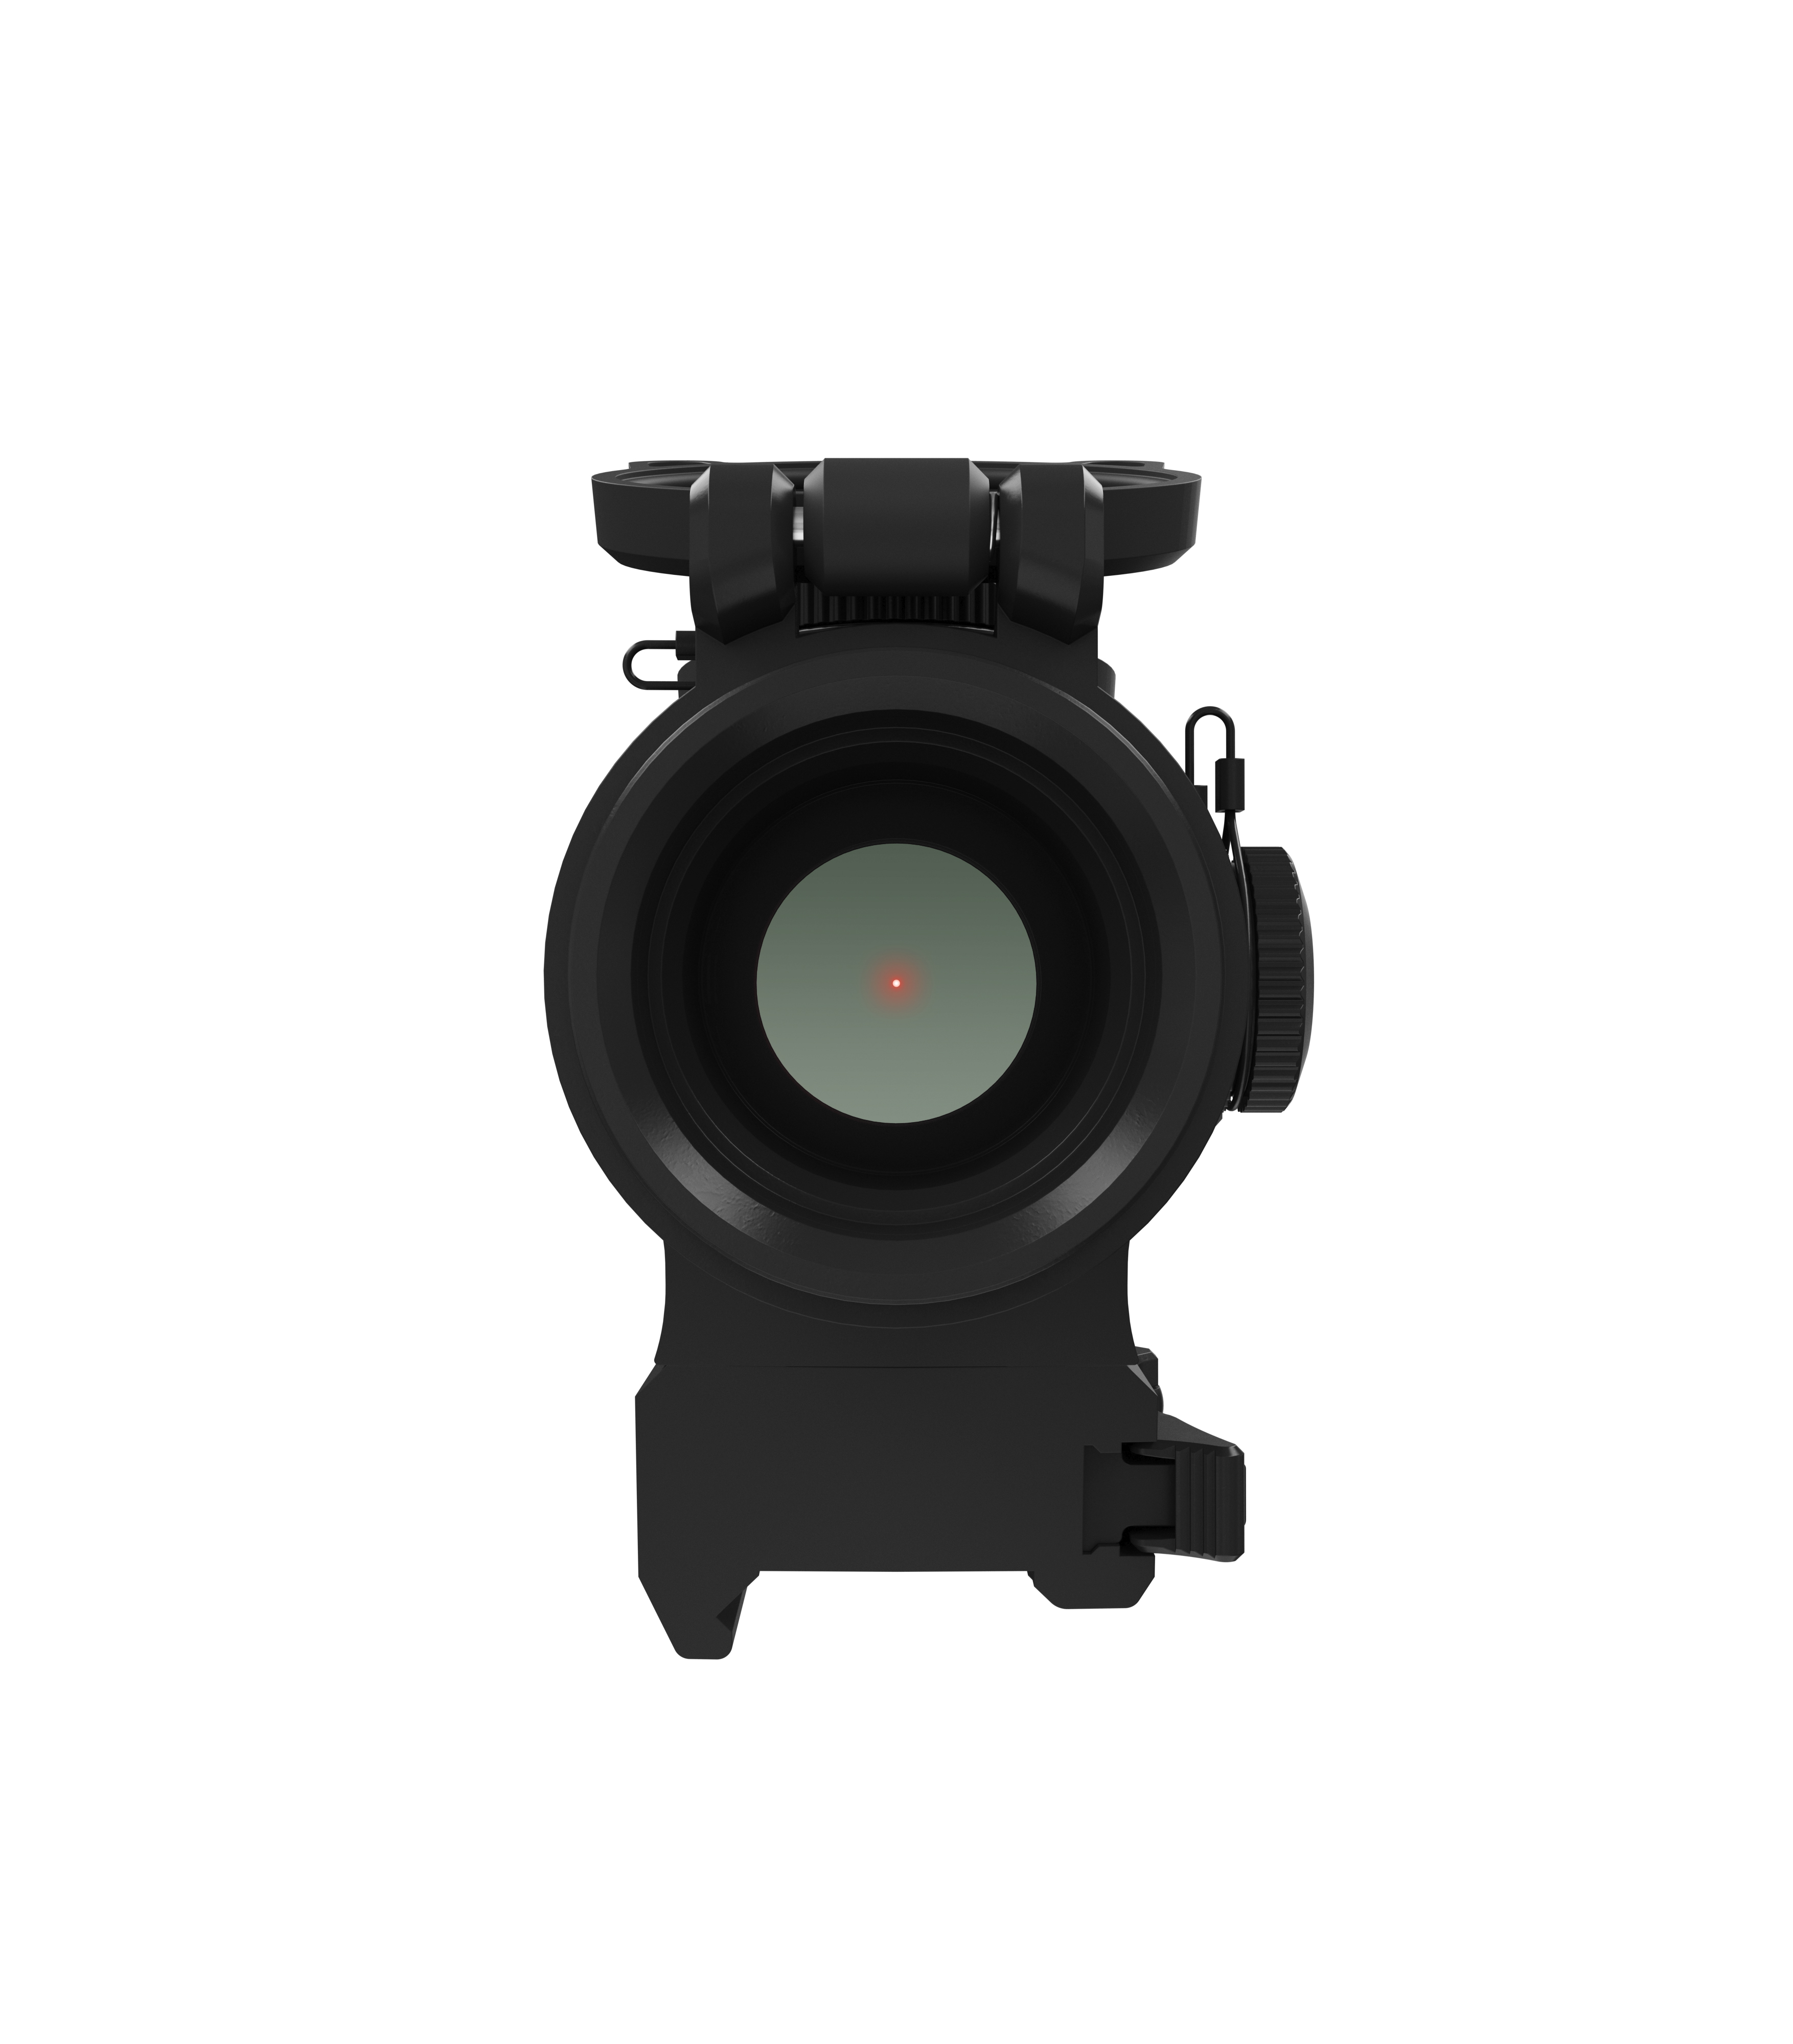 Holosun HS402C Tube red dot sight with 2MOA dot reticle solar cell, black, Picatinny/Weaver quick r…